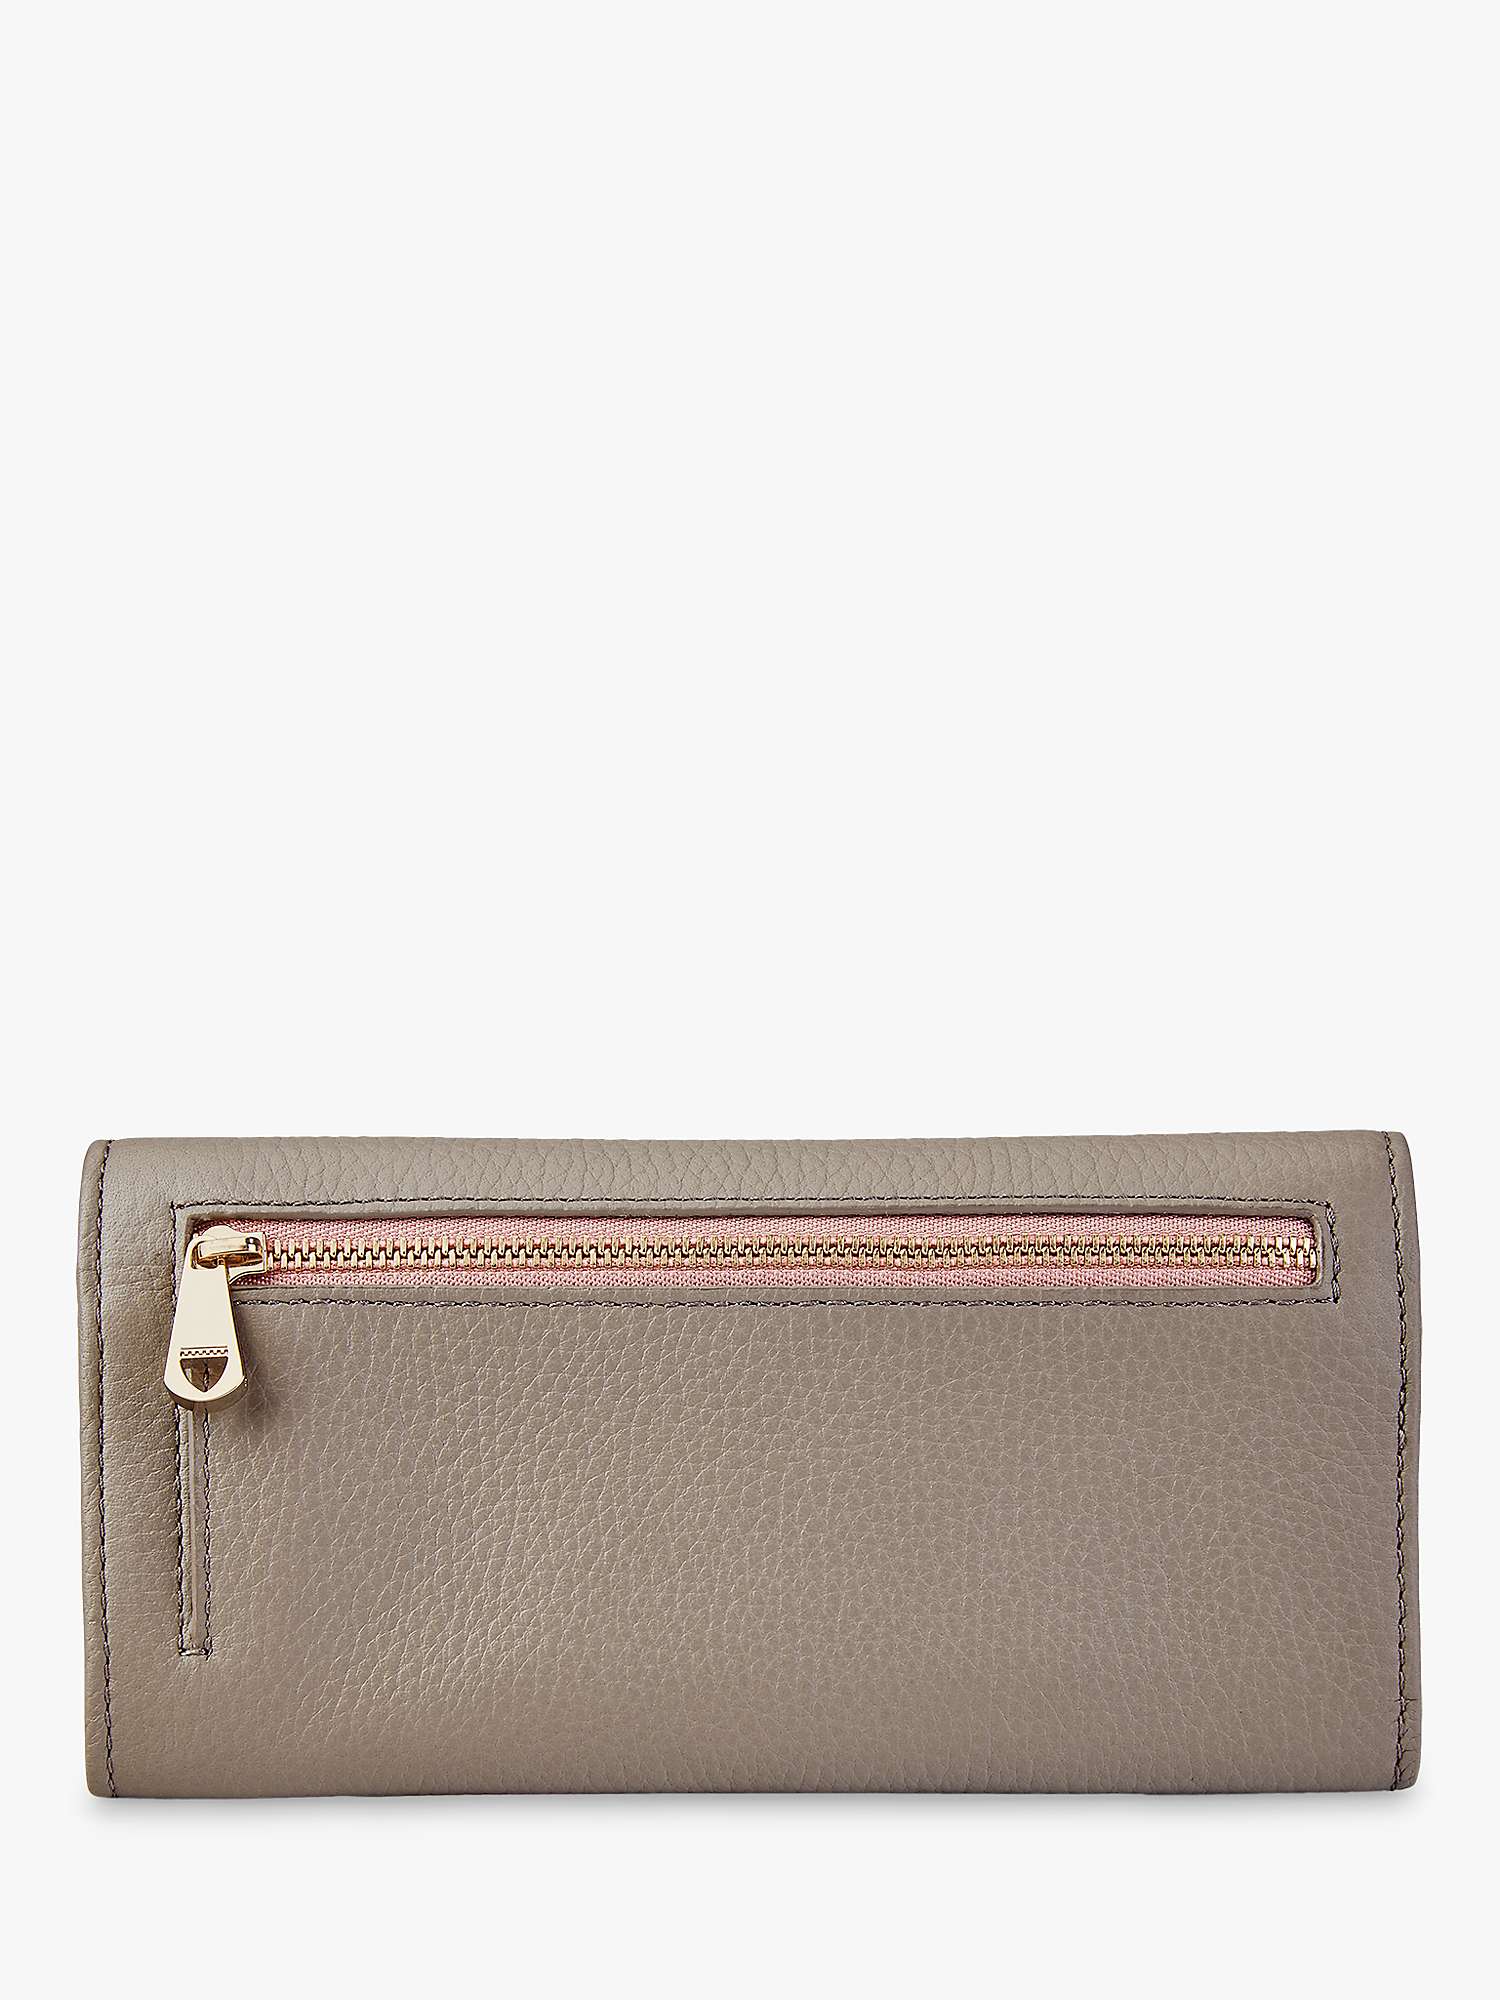 Buy Aspinal of London Lottie Pebble Leather Purse Online at johnlewis.com